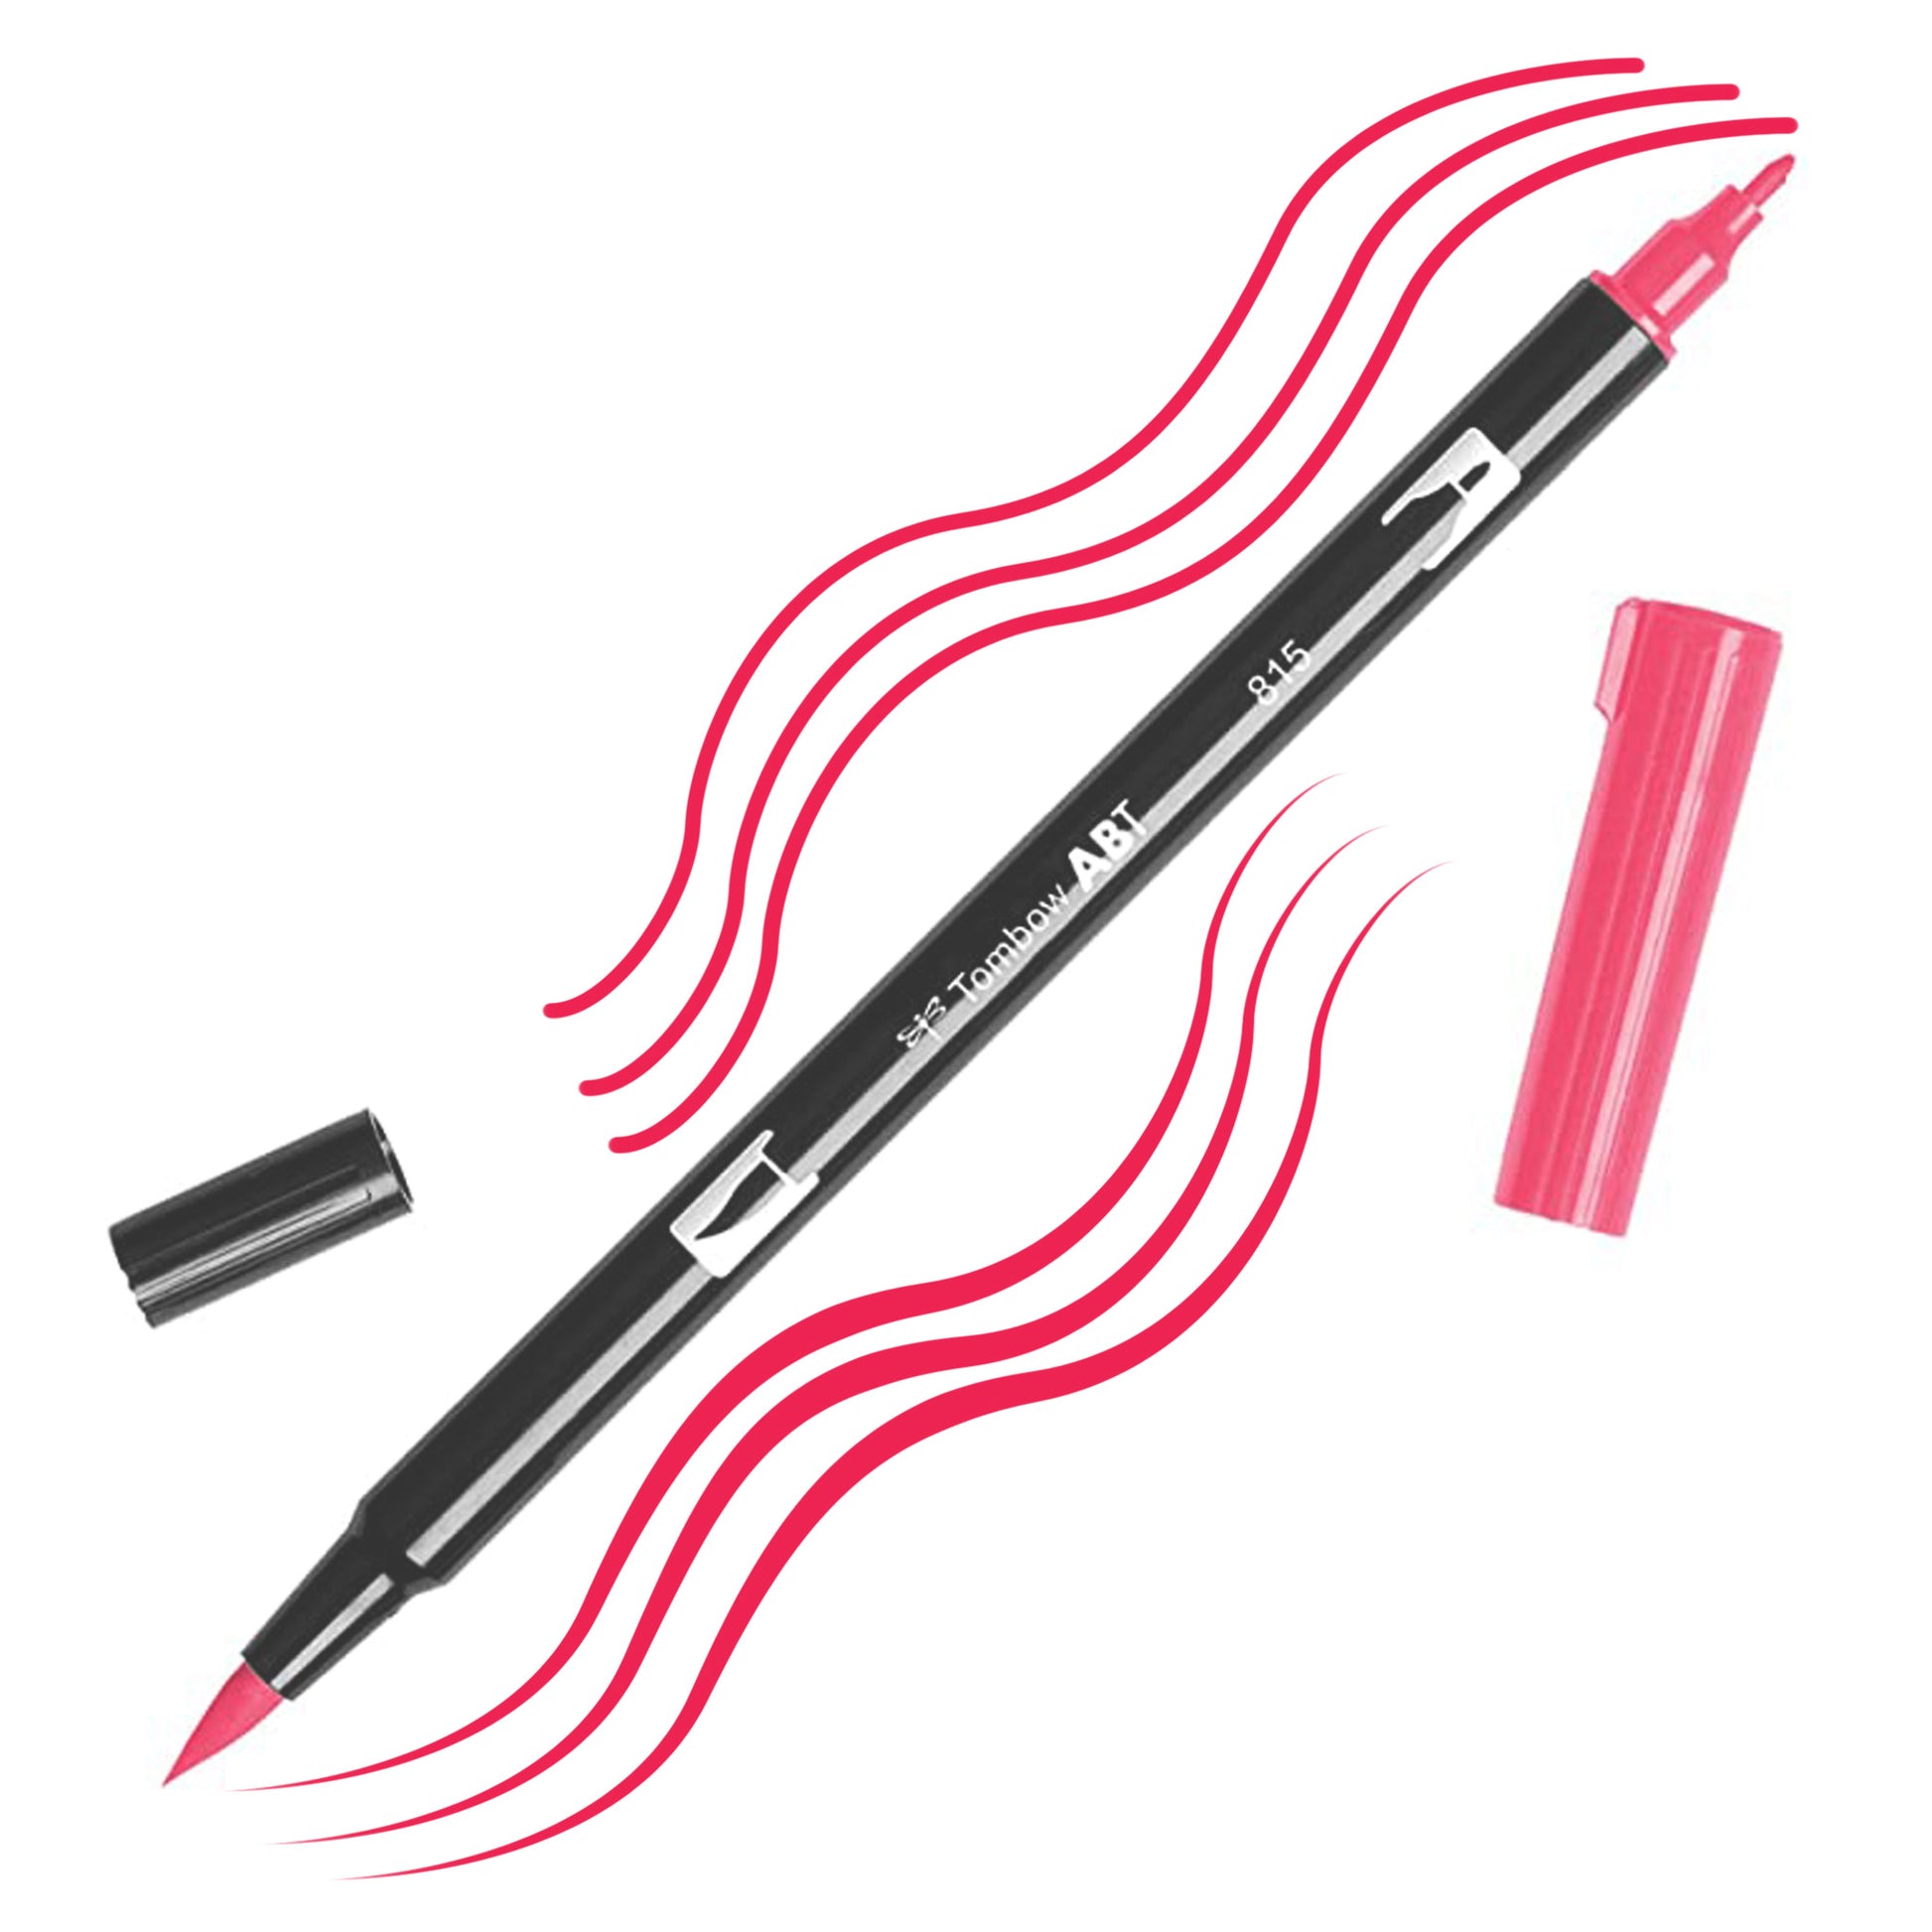 Cherry Tombow double-headed brush-pen with a flexible nylon fiber brush tip and a fine tip against a white background with Cherry strokes